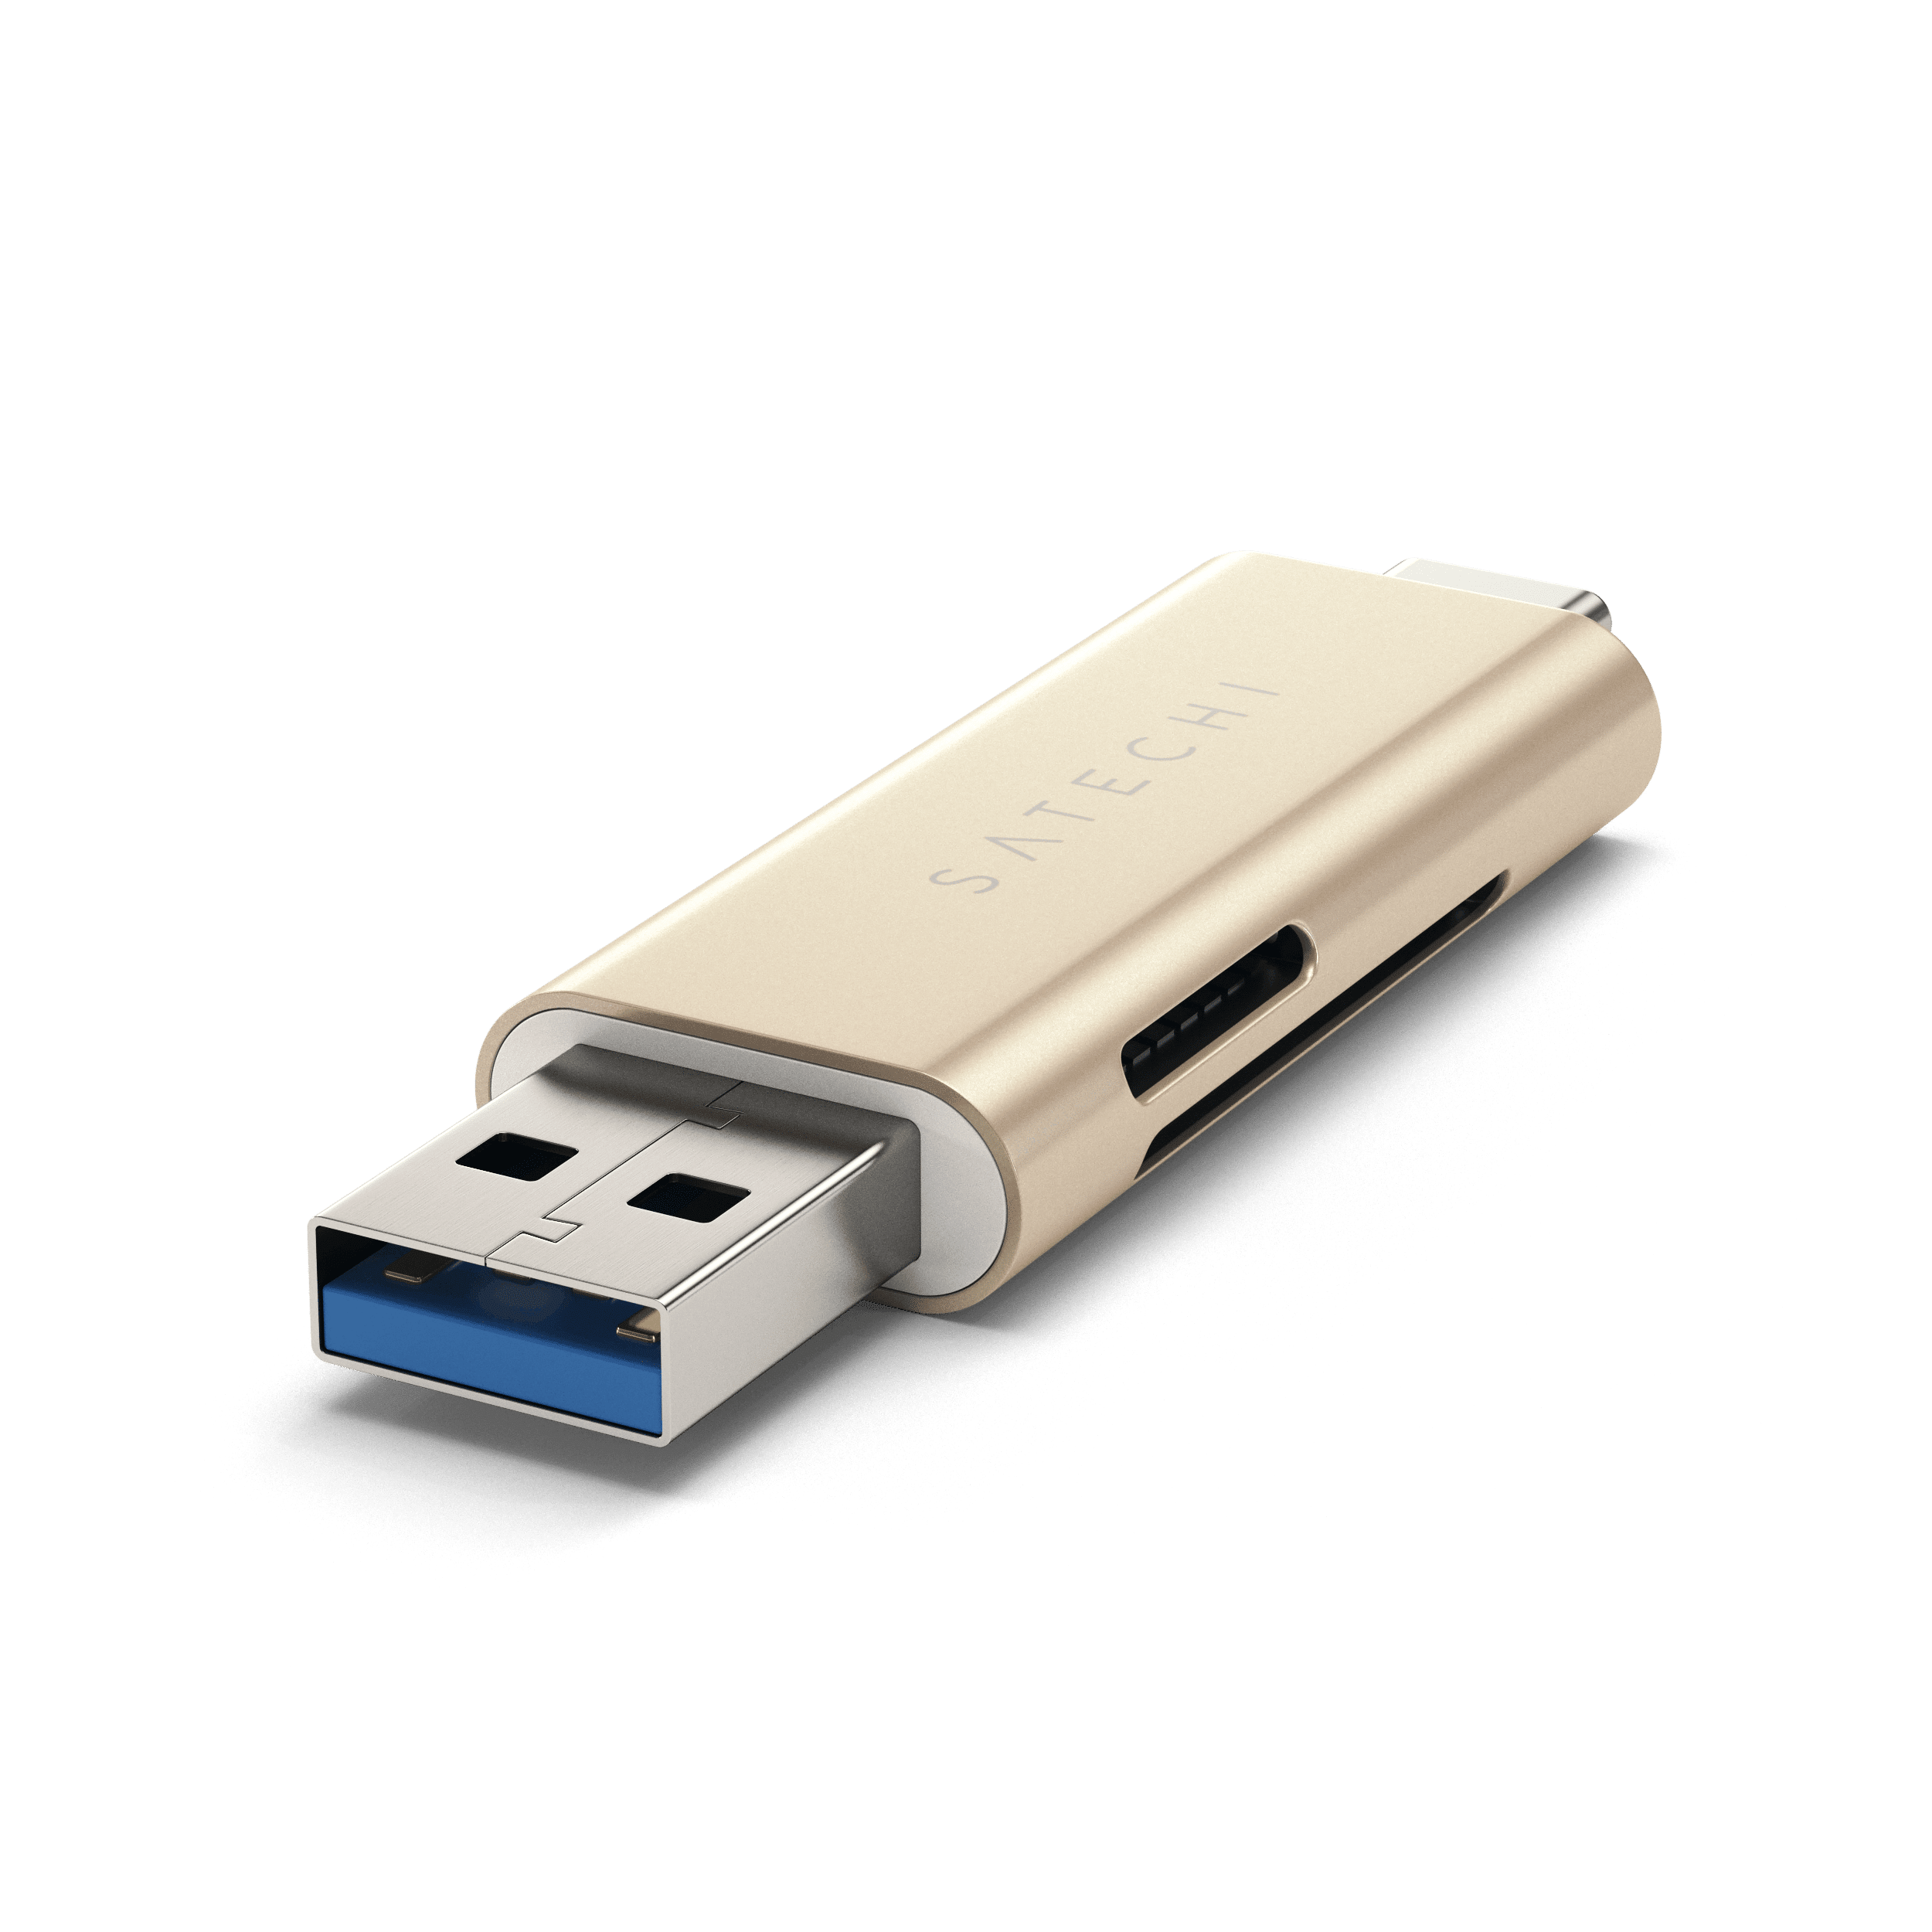 Aluminum Type-C USB 3.0 and Micro/SD Card Reader